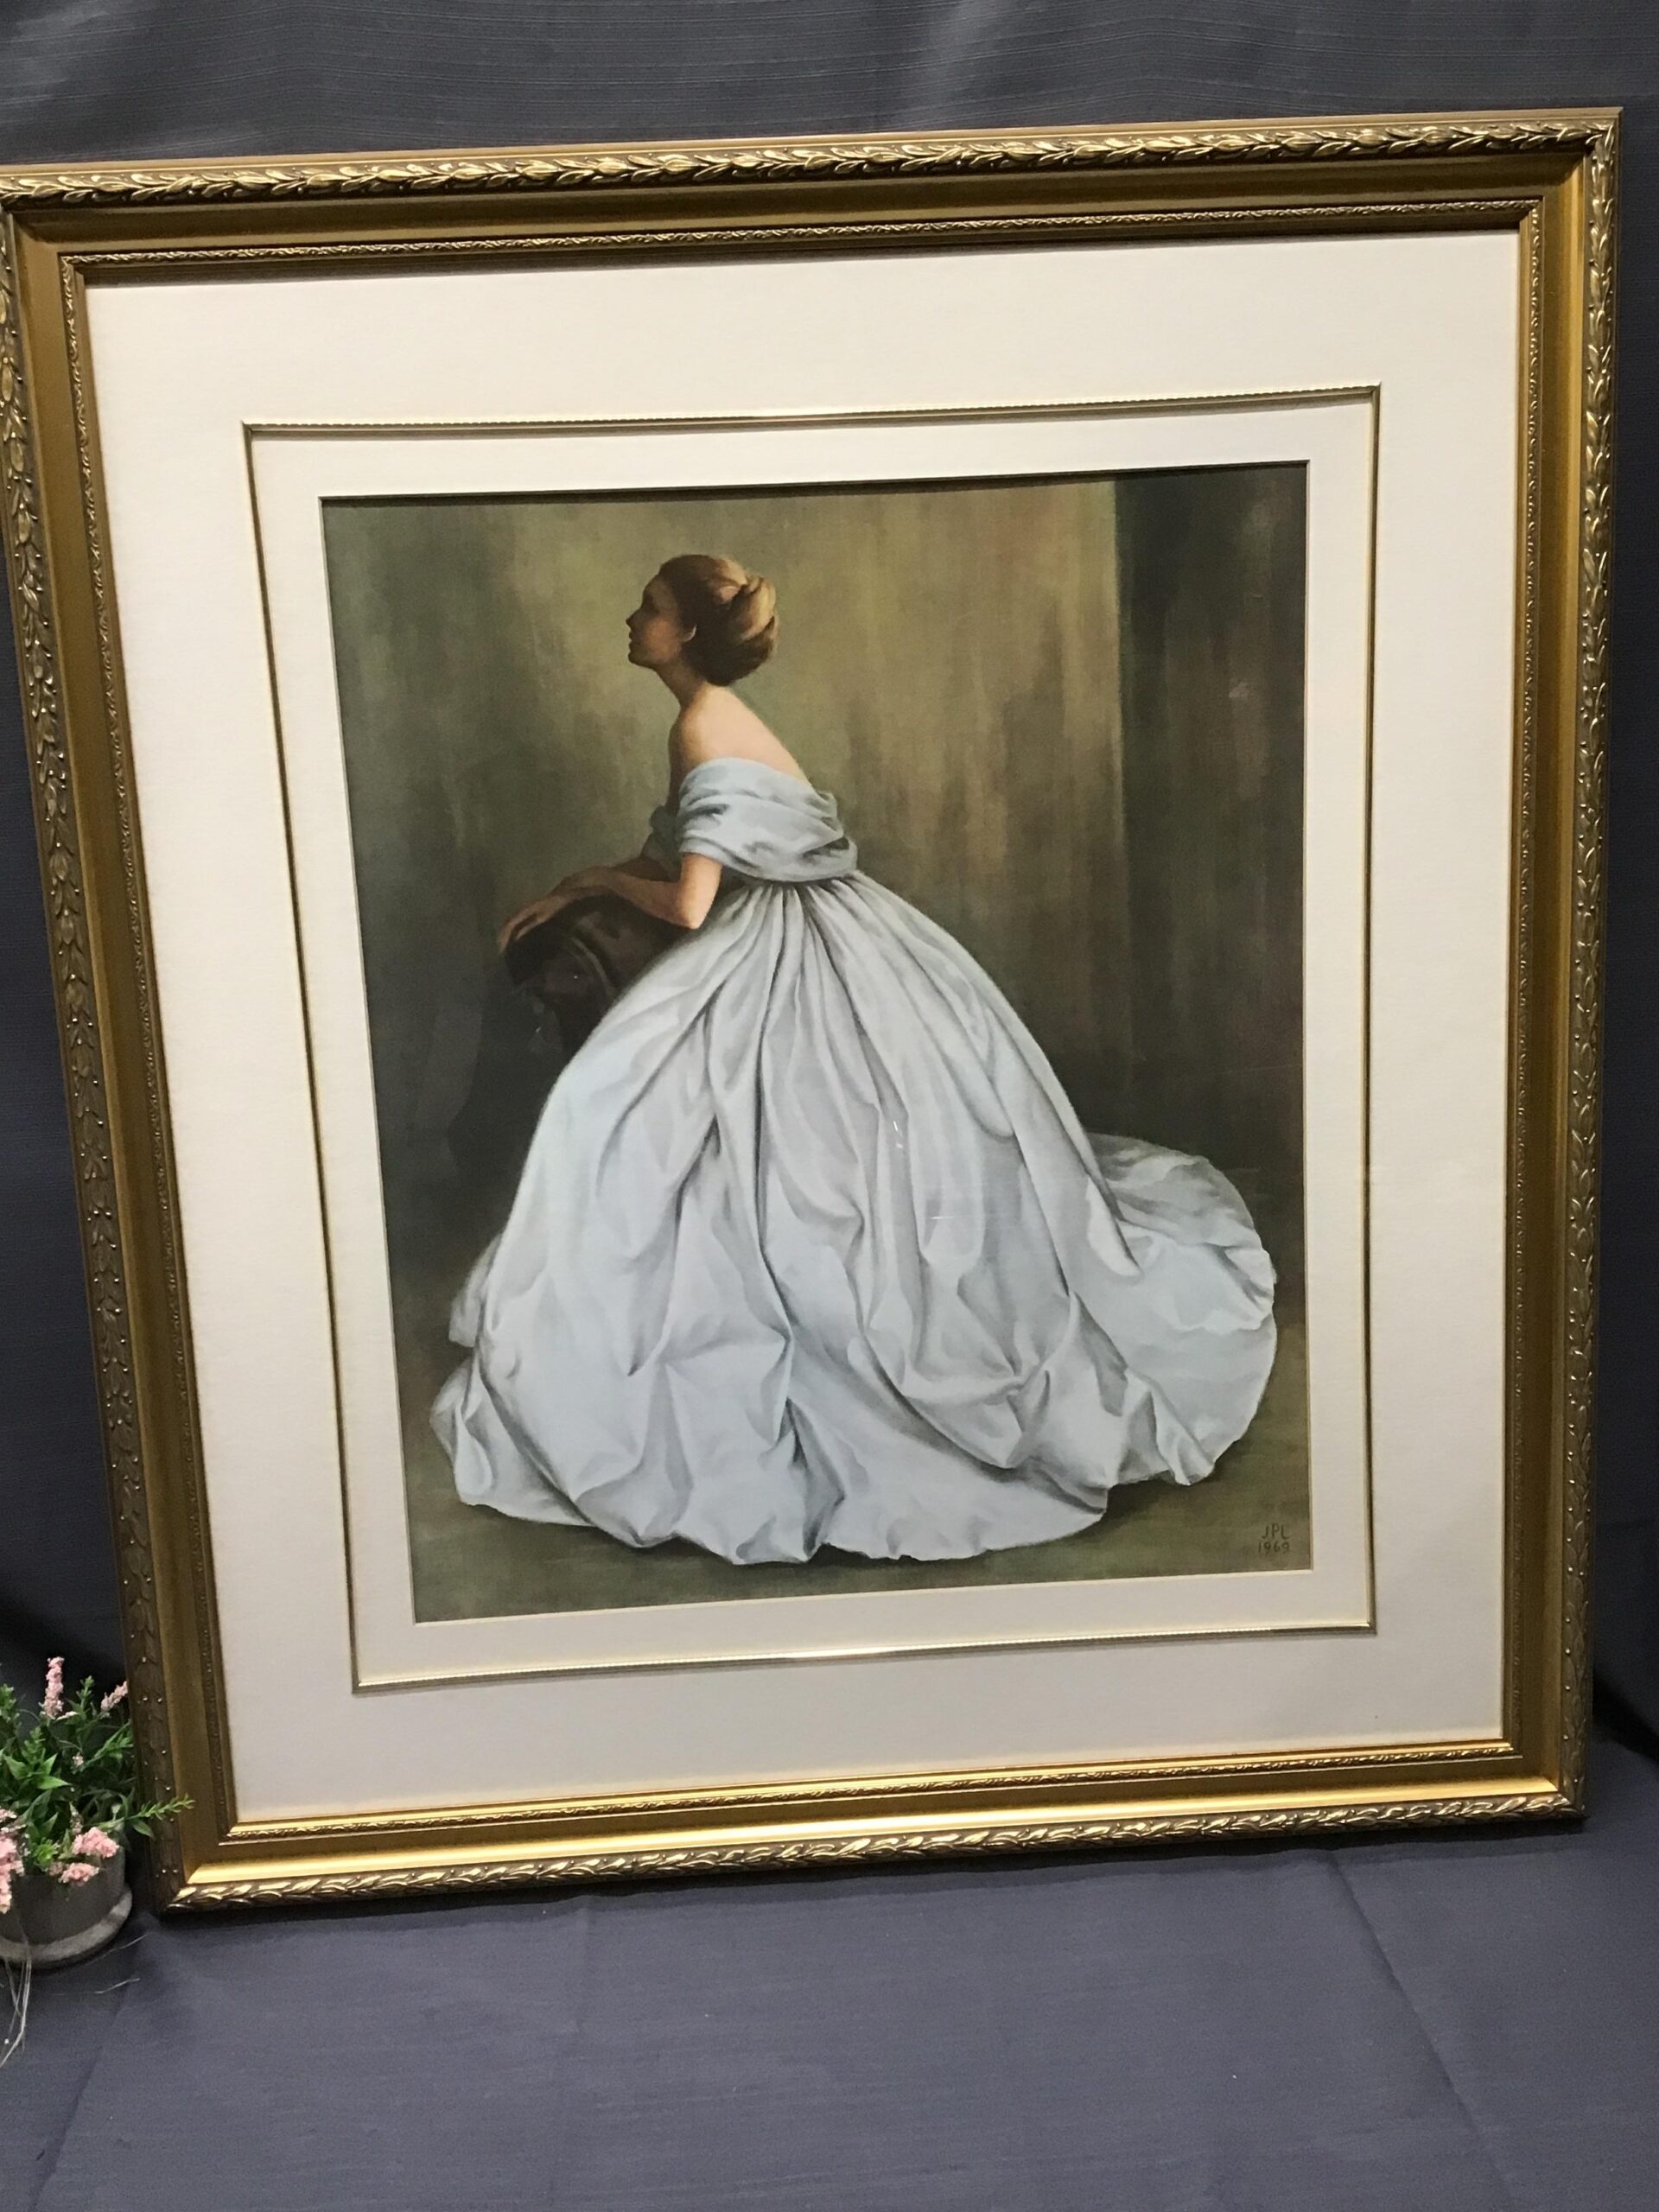 Profile of Siting Woman in White Gown